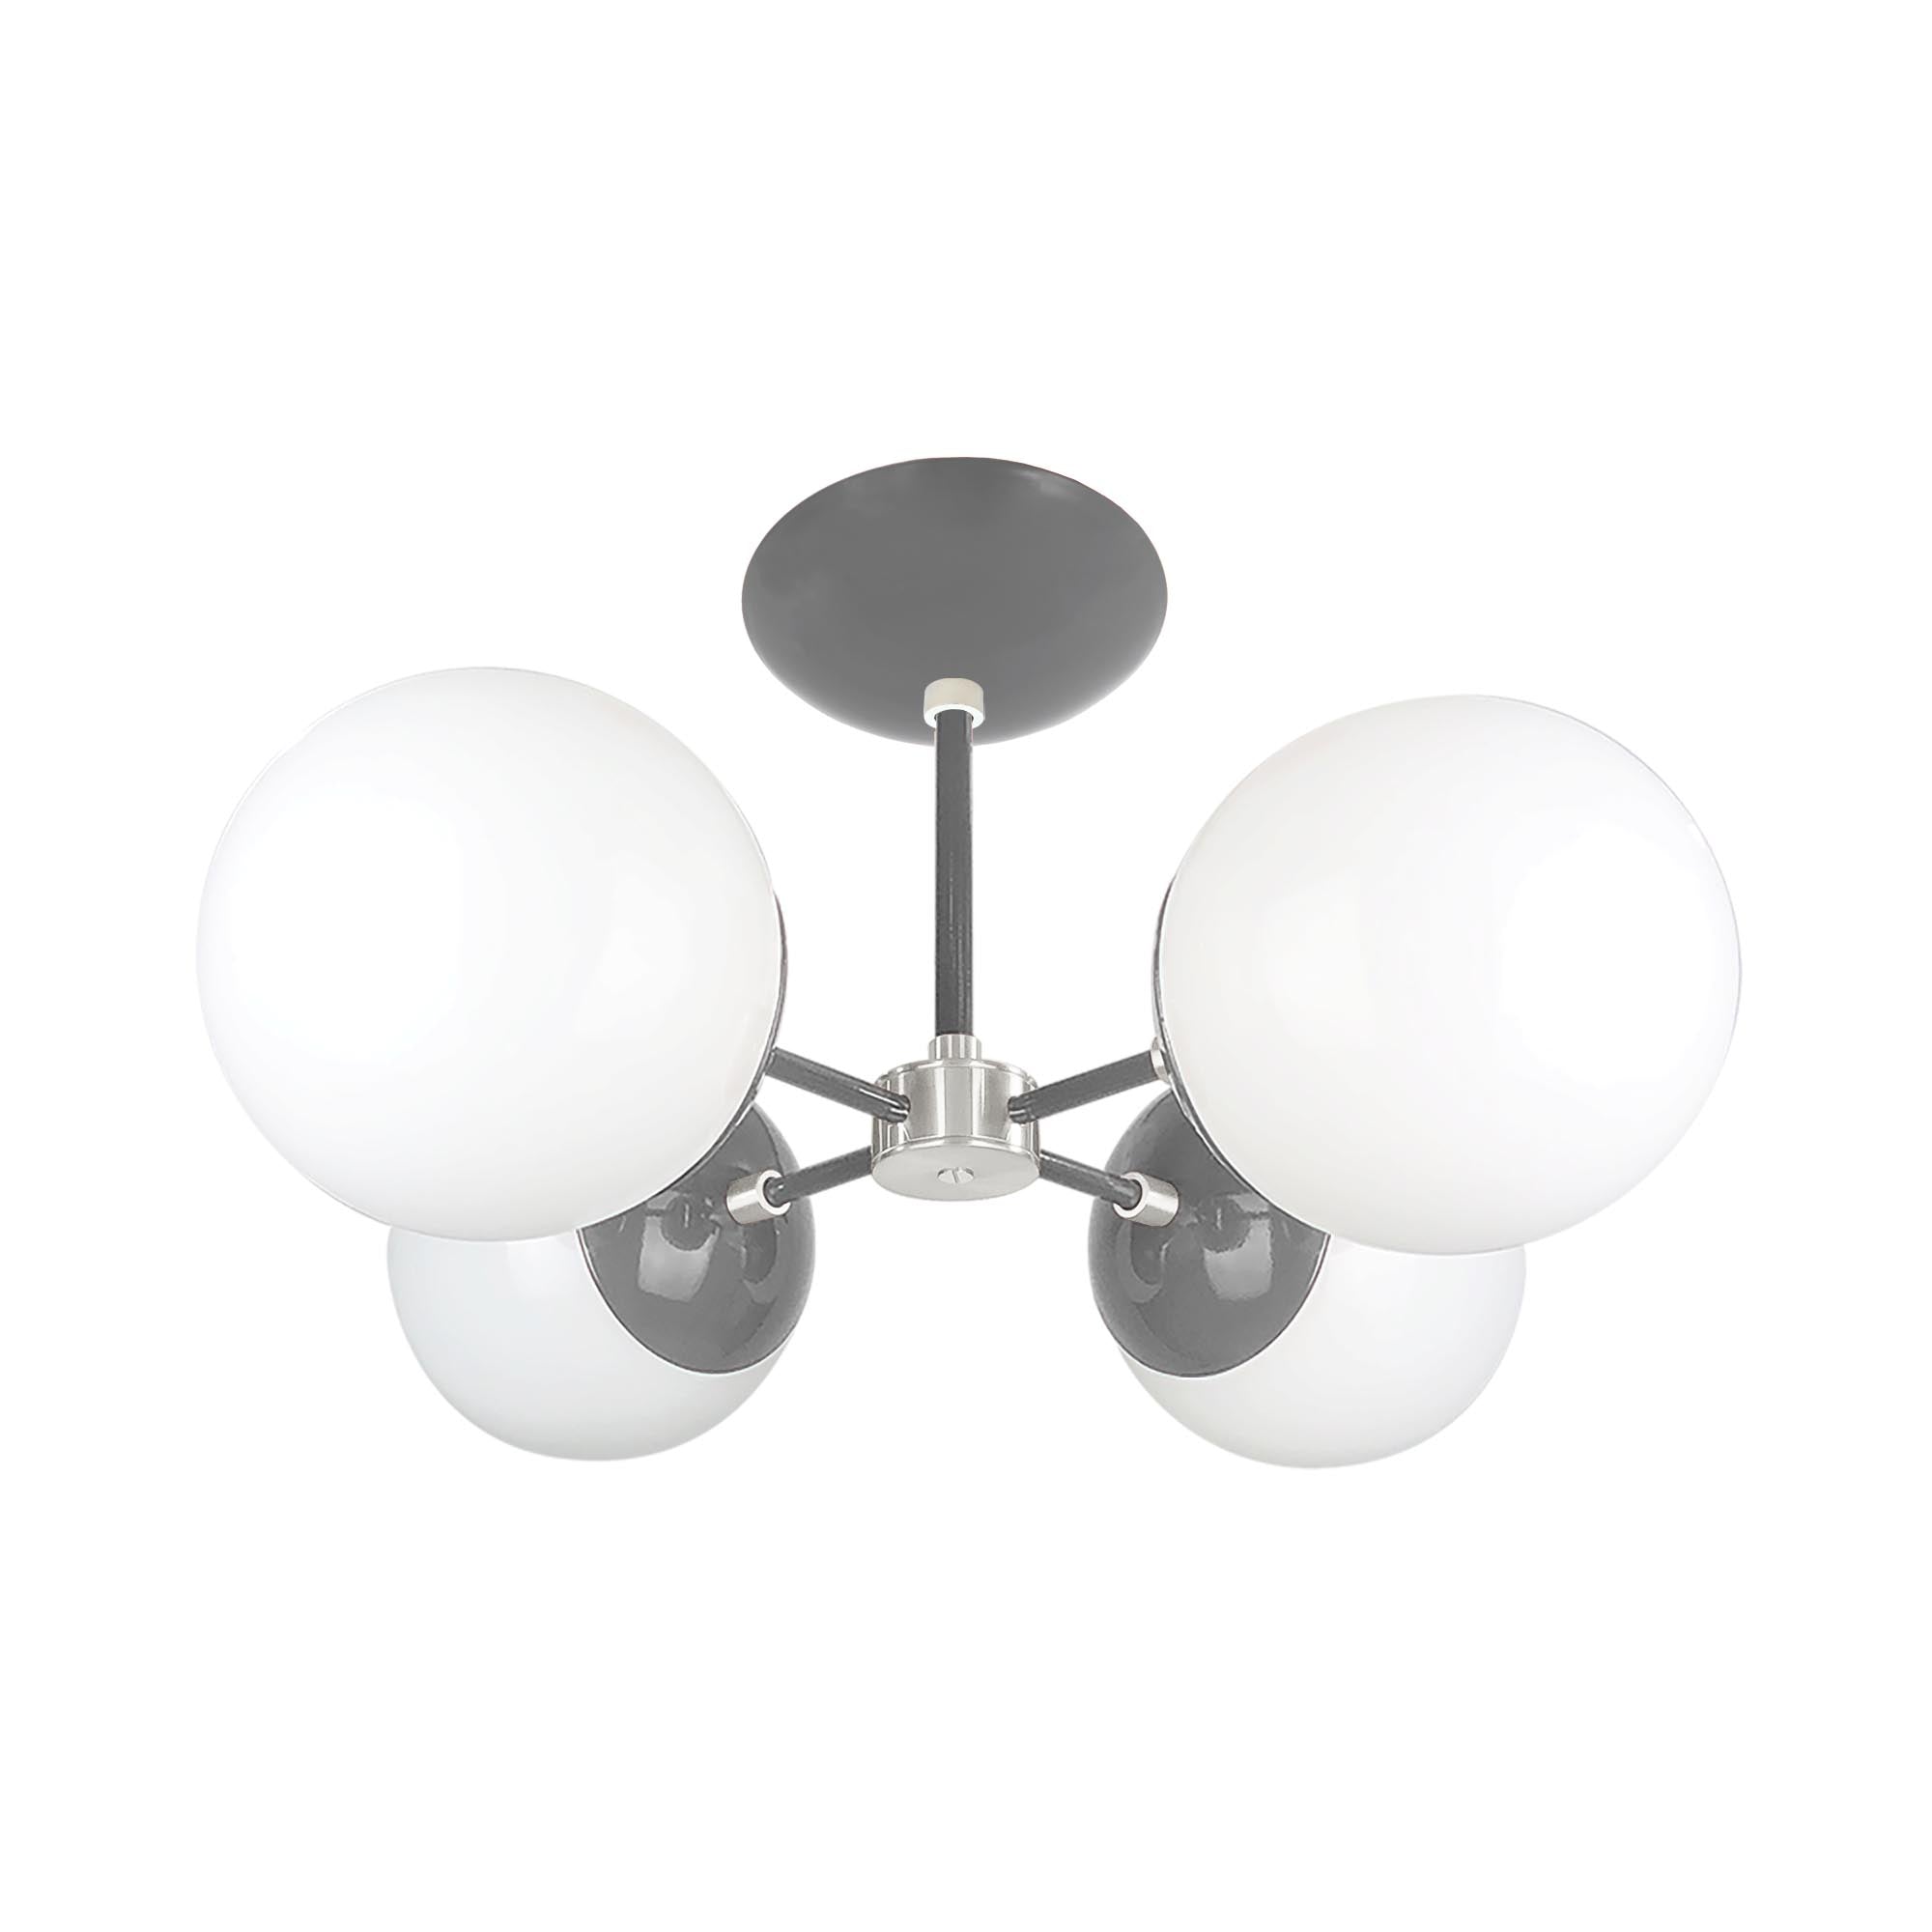 Nickel and charcoal color Orbi flush mount Dutton Brown lighting